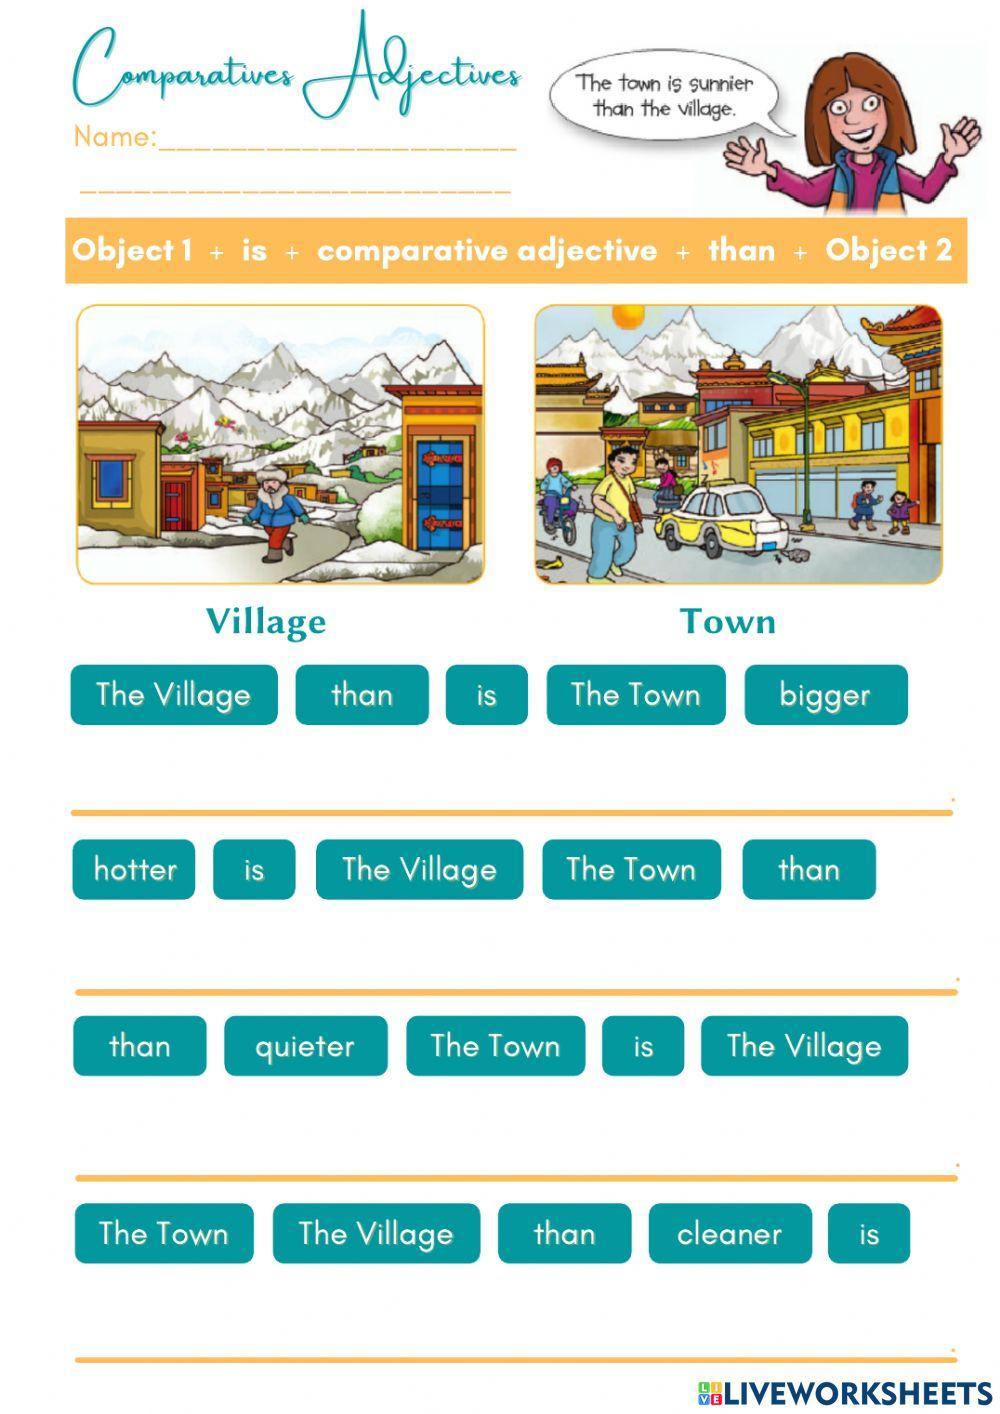 Comparatives Adjectives Exercises